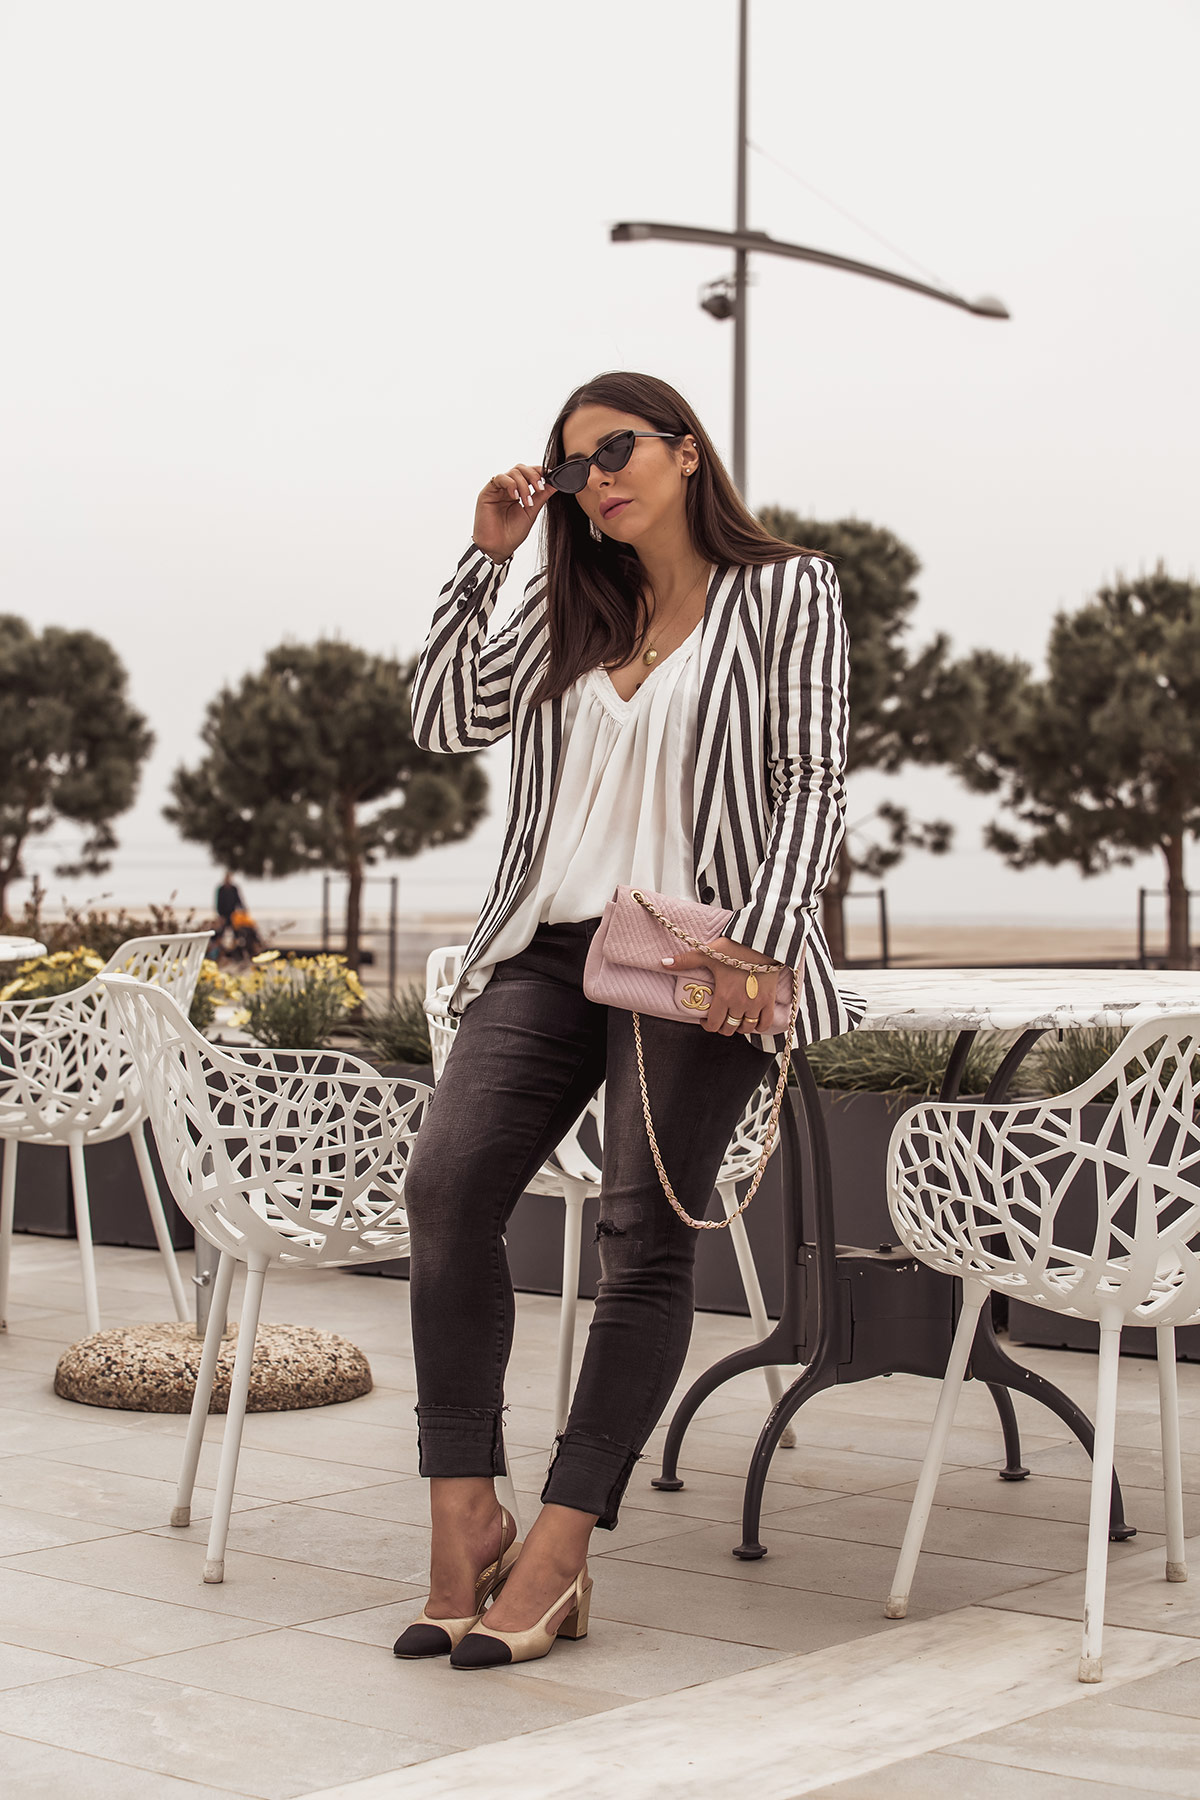 Stella Asteria showing how to wear a striped blazer for spring - striped blazer from H&M, dark grey jeans, Chanel slingbacks, white top and pink Chanel chevron bag, Le Specs cat-eye sunglasses